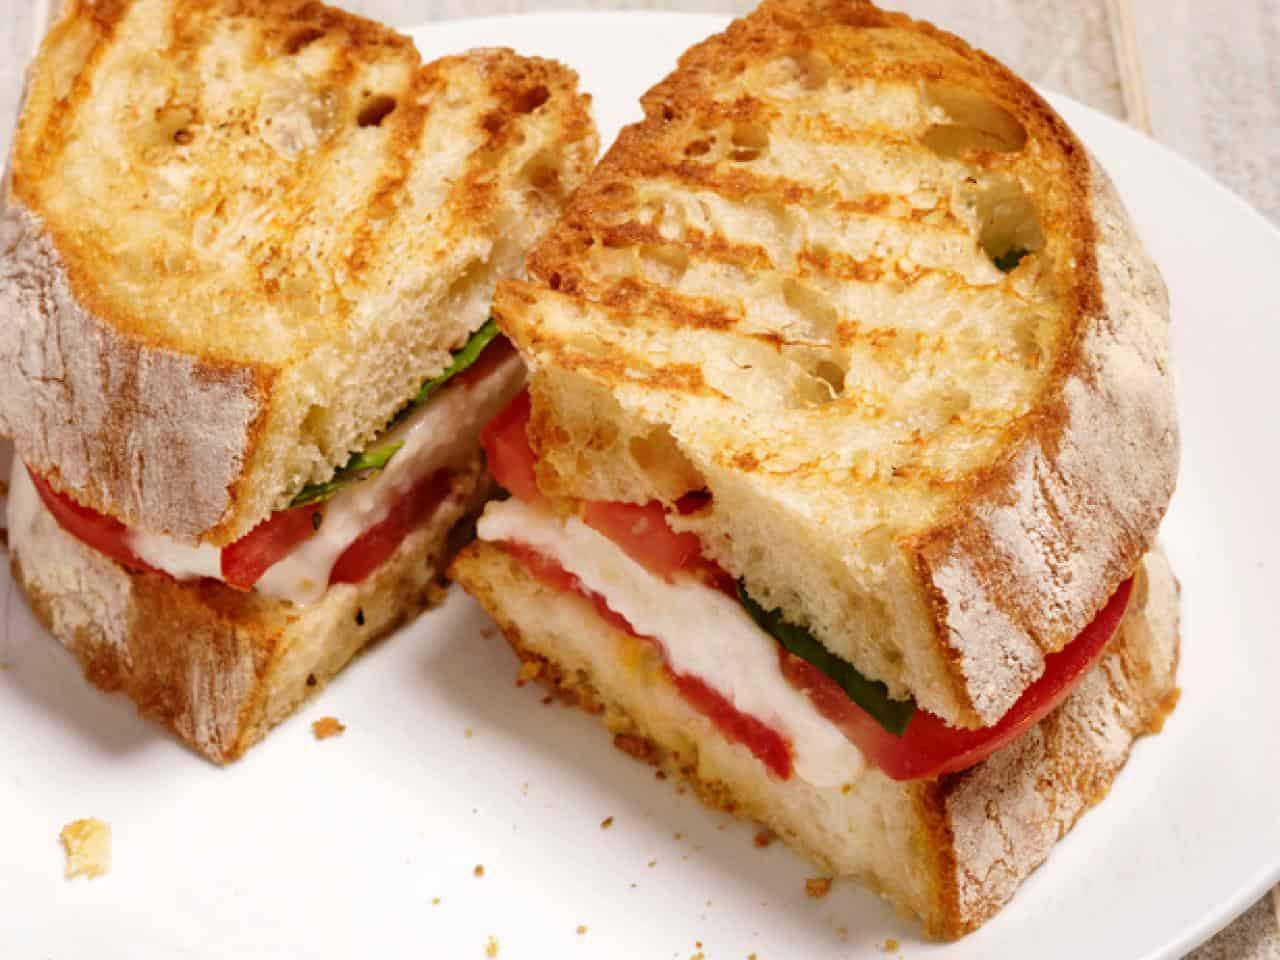 Recipes For Panini Sandwiches
 15 Awesome Recipes Made with a Sandwich Press